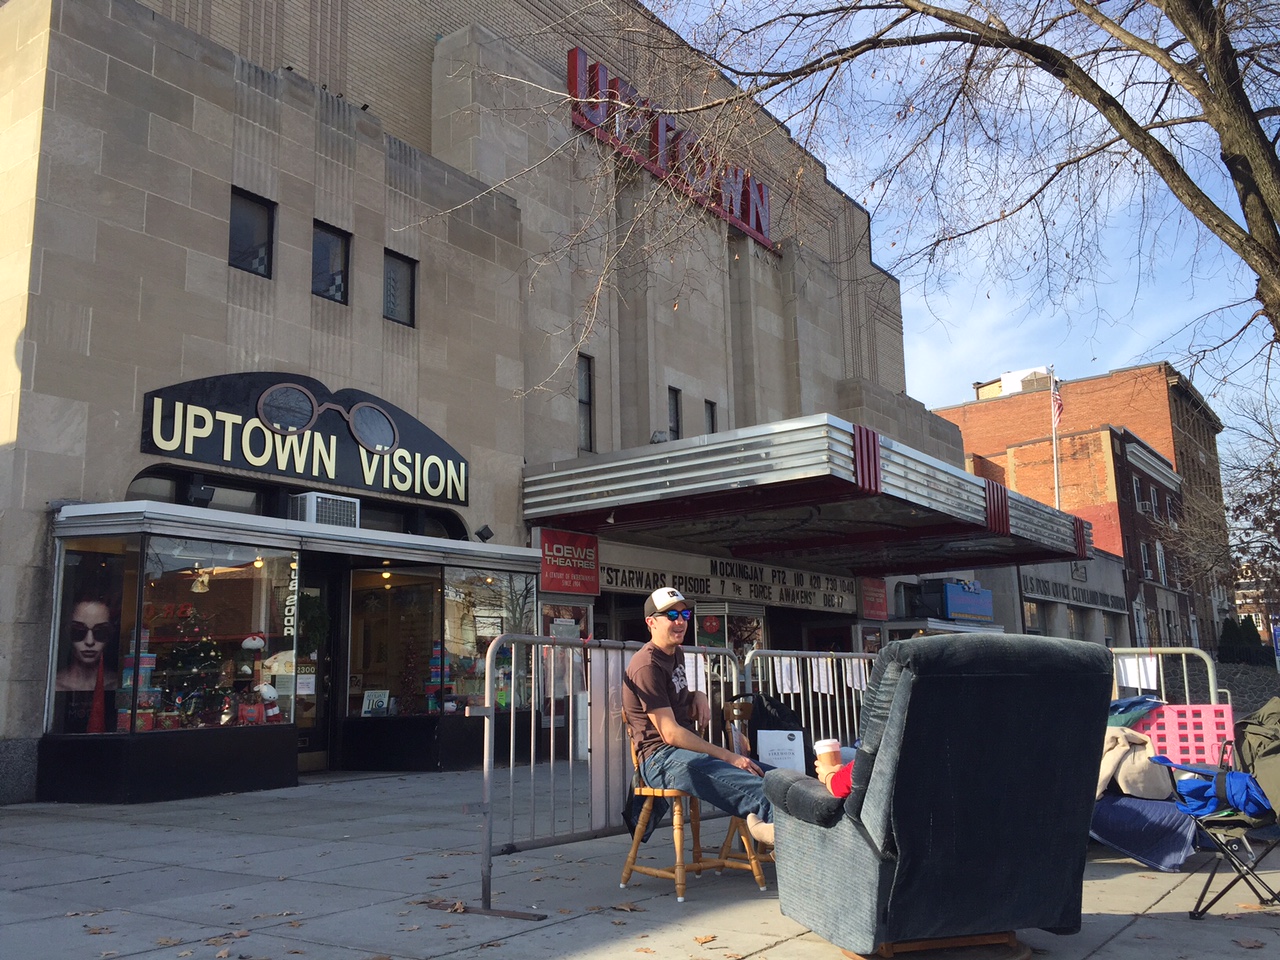 One Star Wars fan already camped out in front of Uptown Theater in D.C.